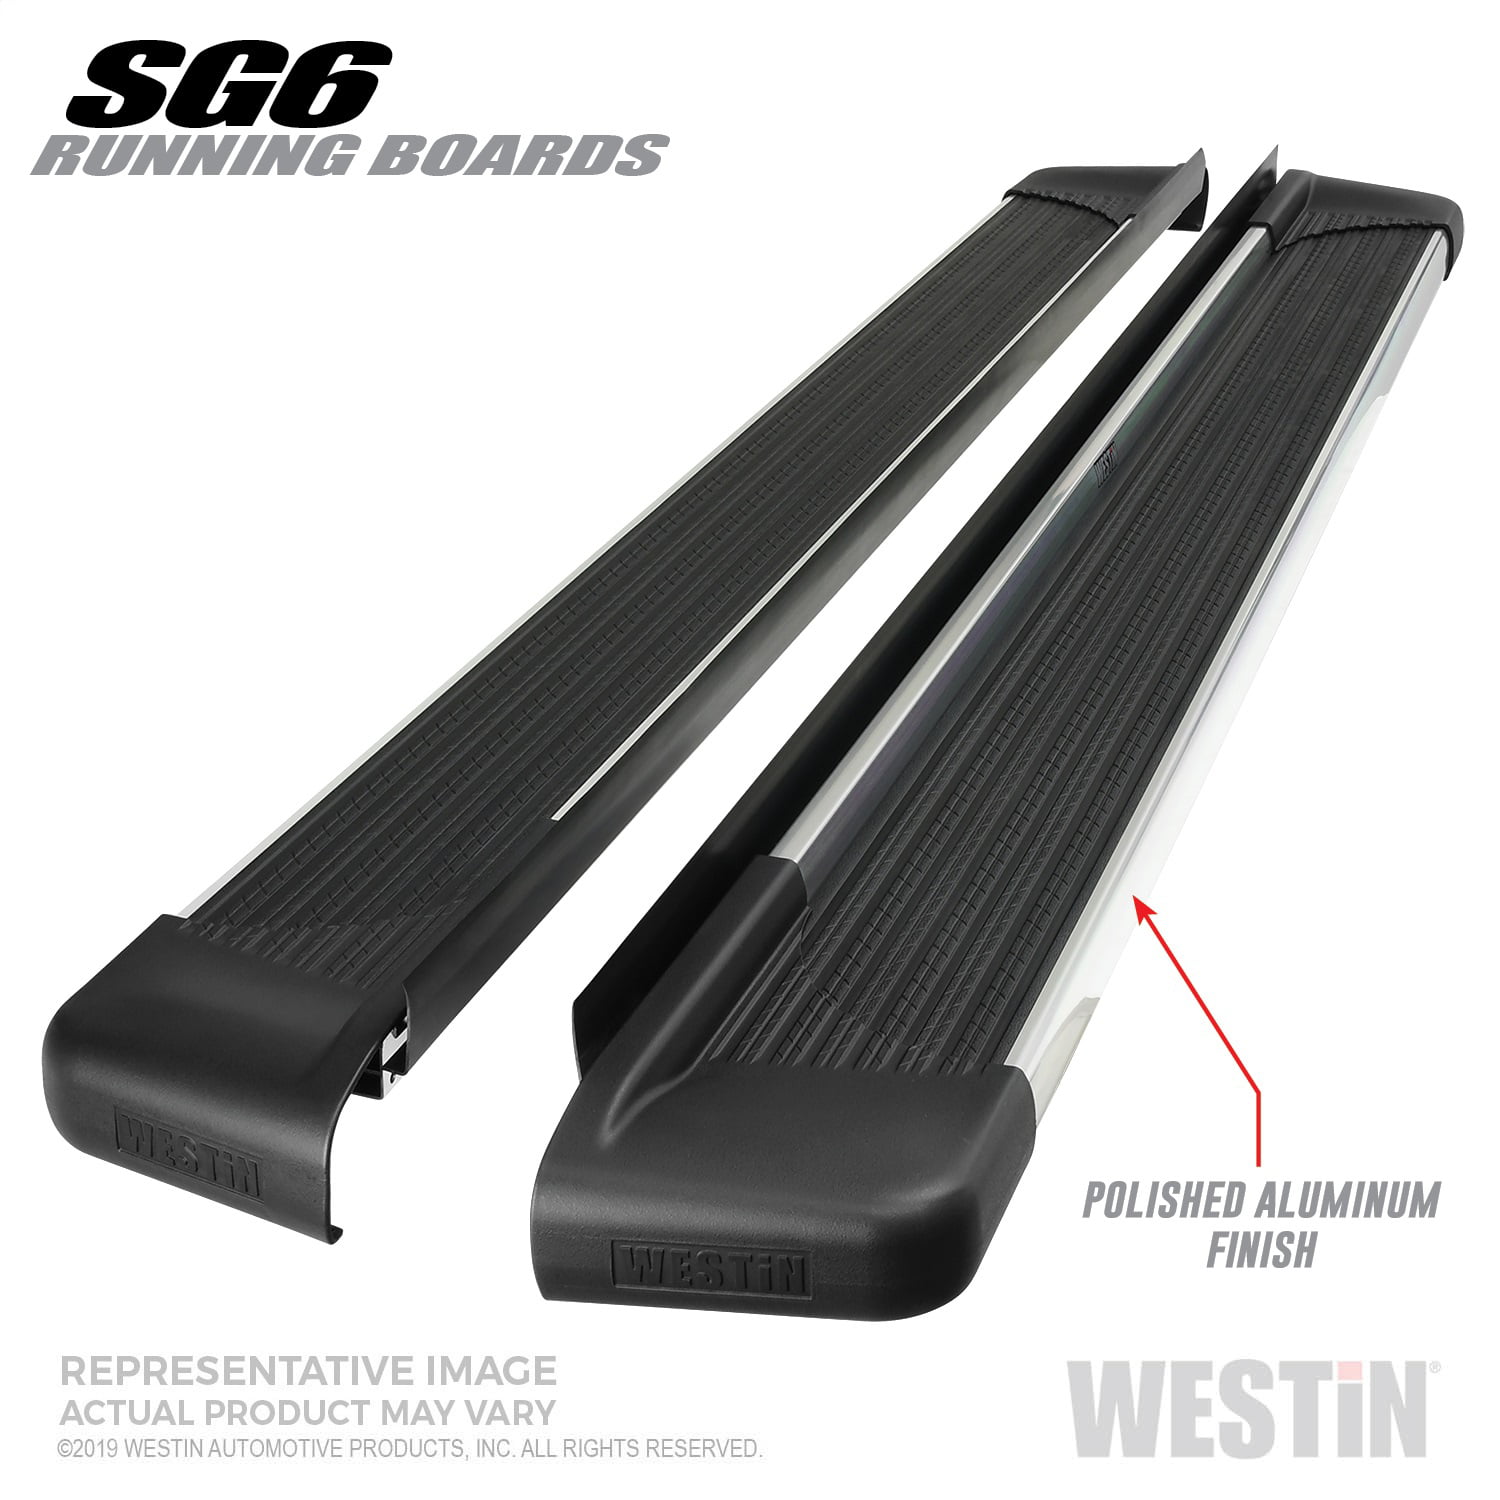 79 INCHES POLISHED SG6 RUNNING BOARDS (BRKT SOLD SEP)